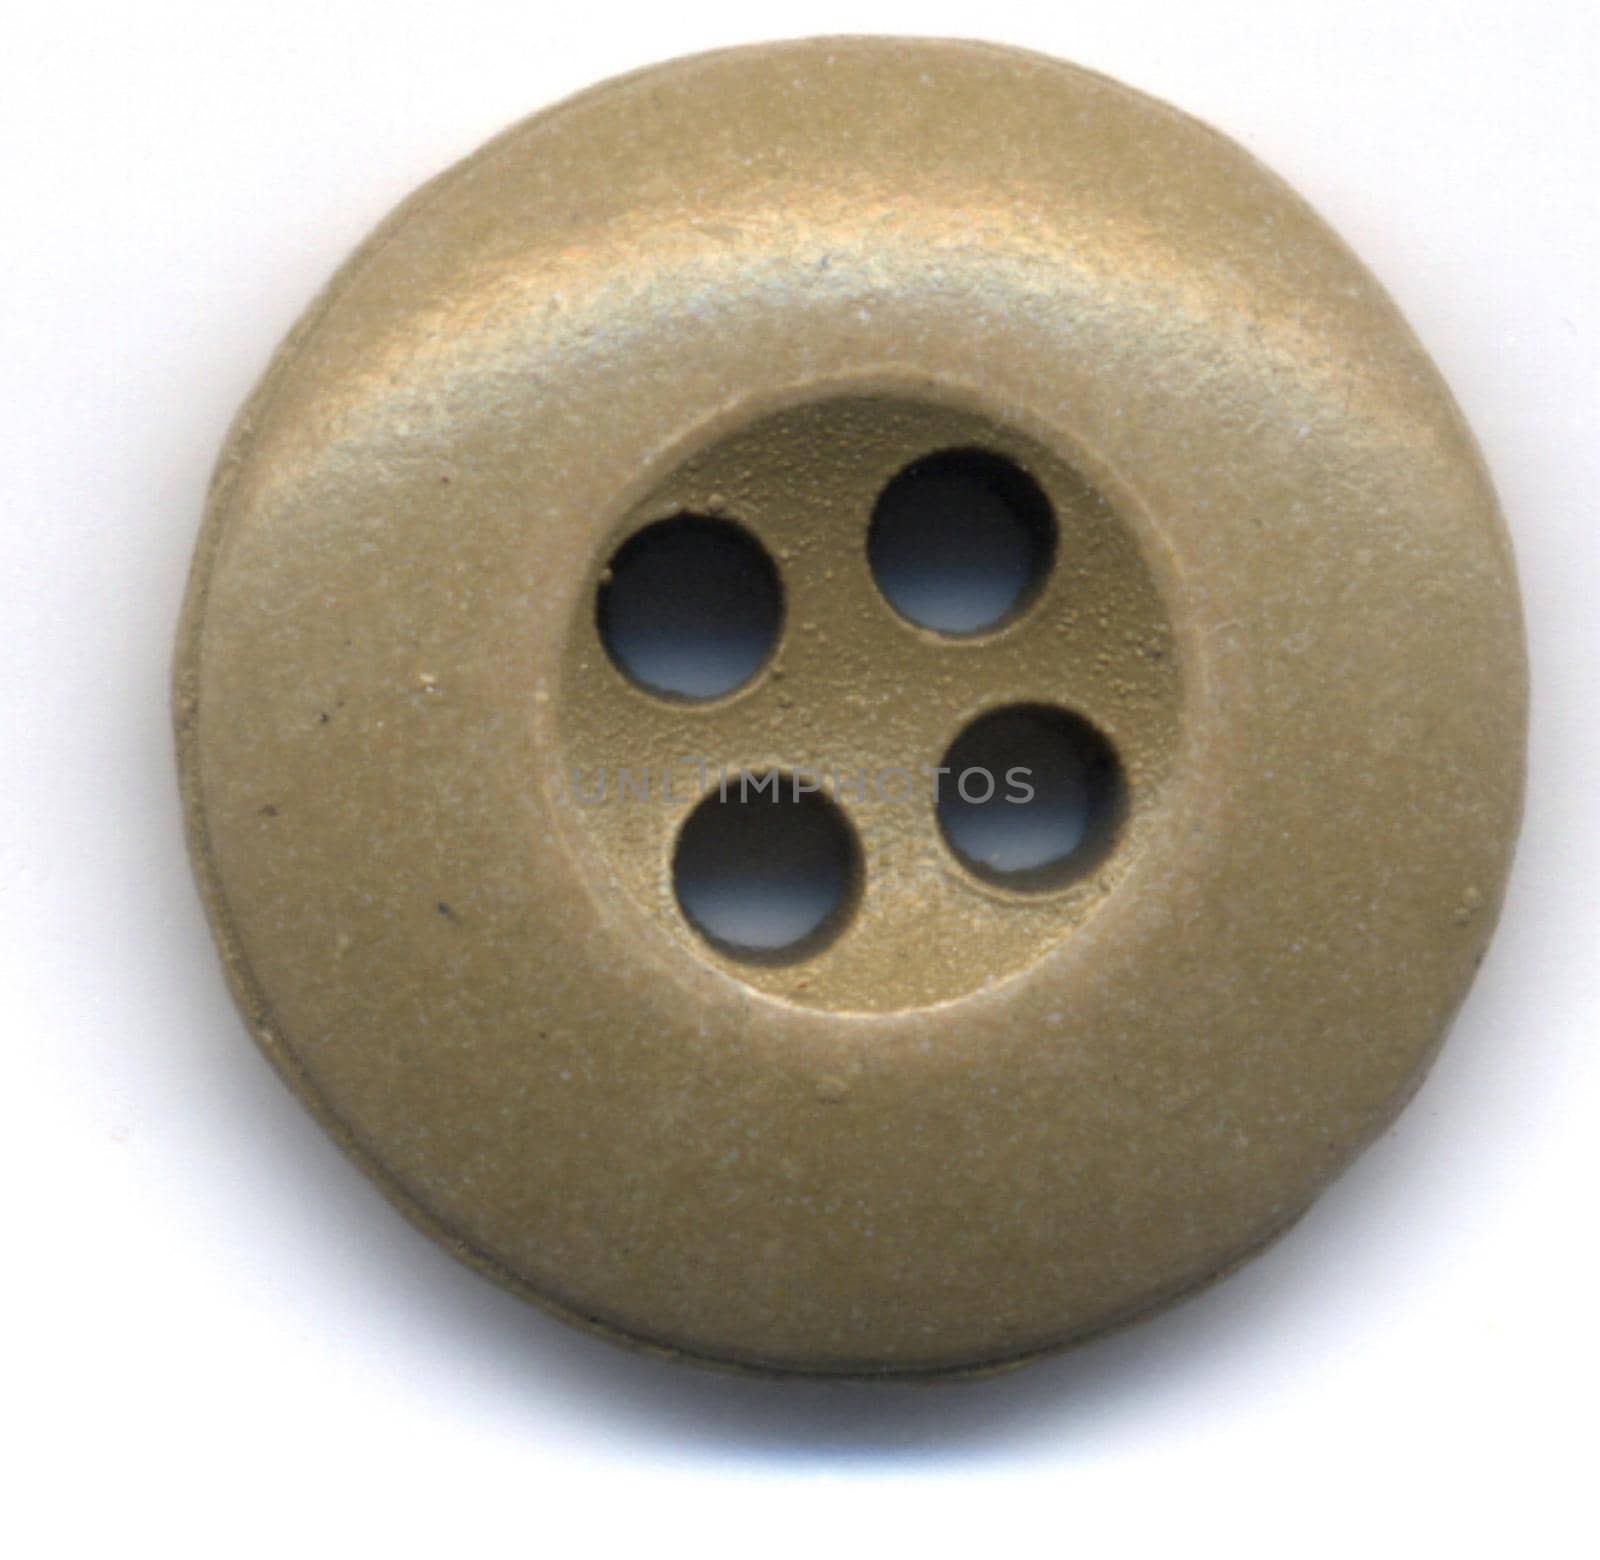 Macro Close Up of Beige Gold Colored Button with Four Holes on White Background